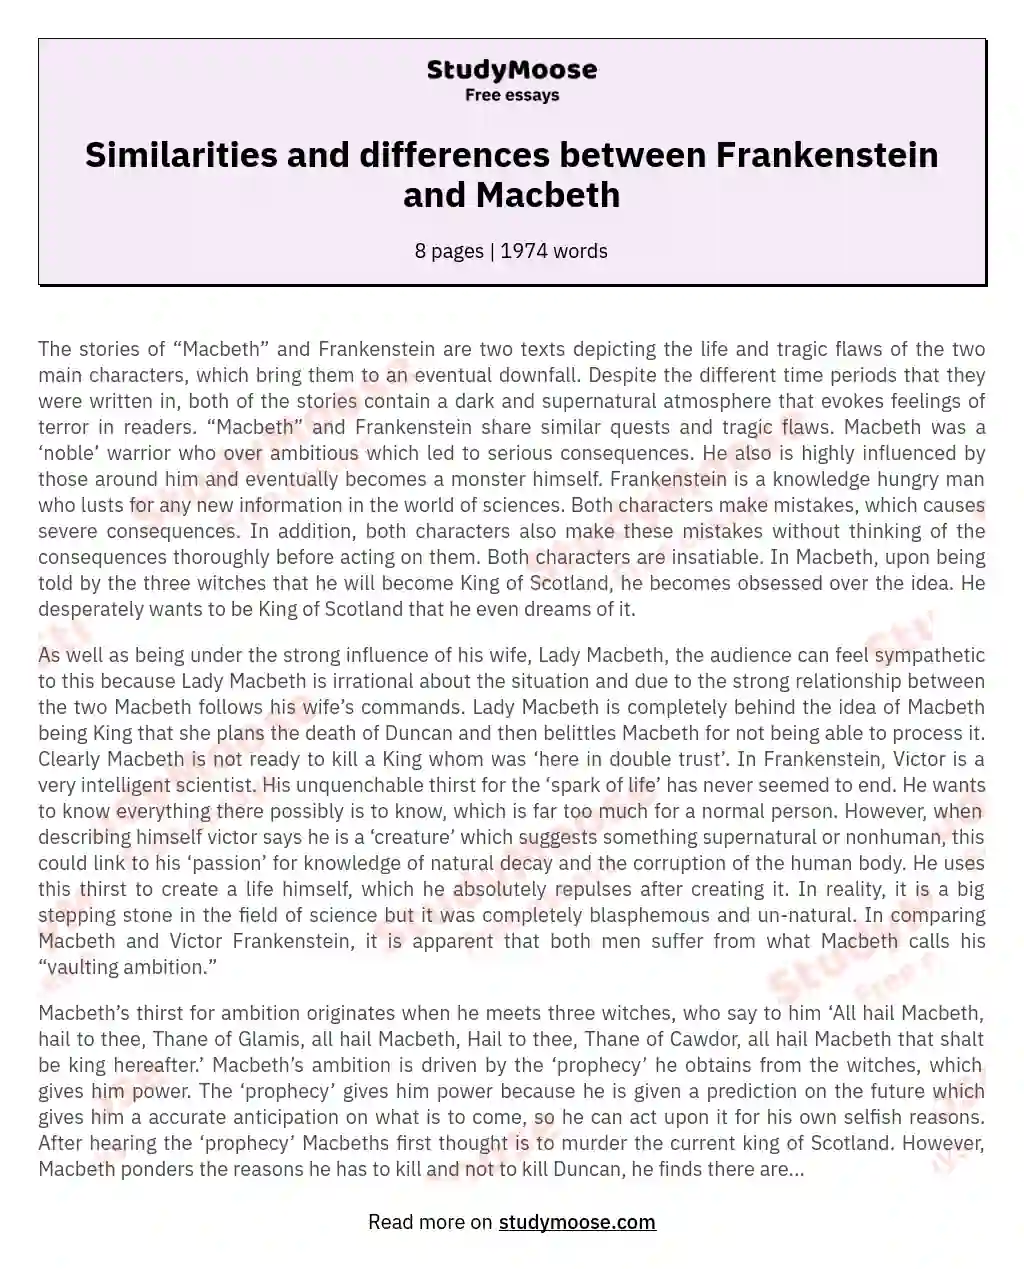 Similarities and differences between Frankenstein and Macbeth essay